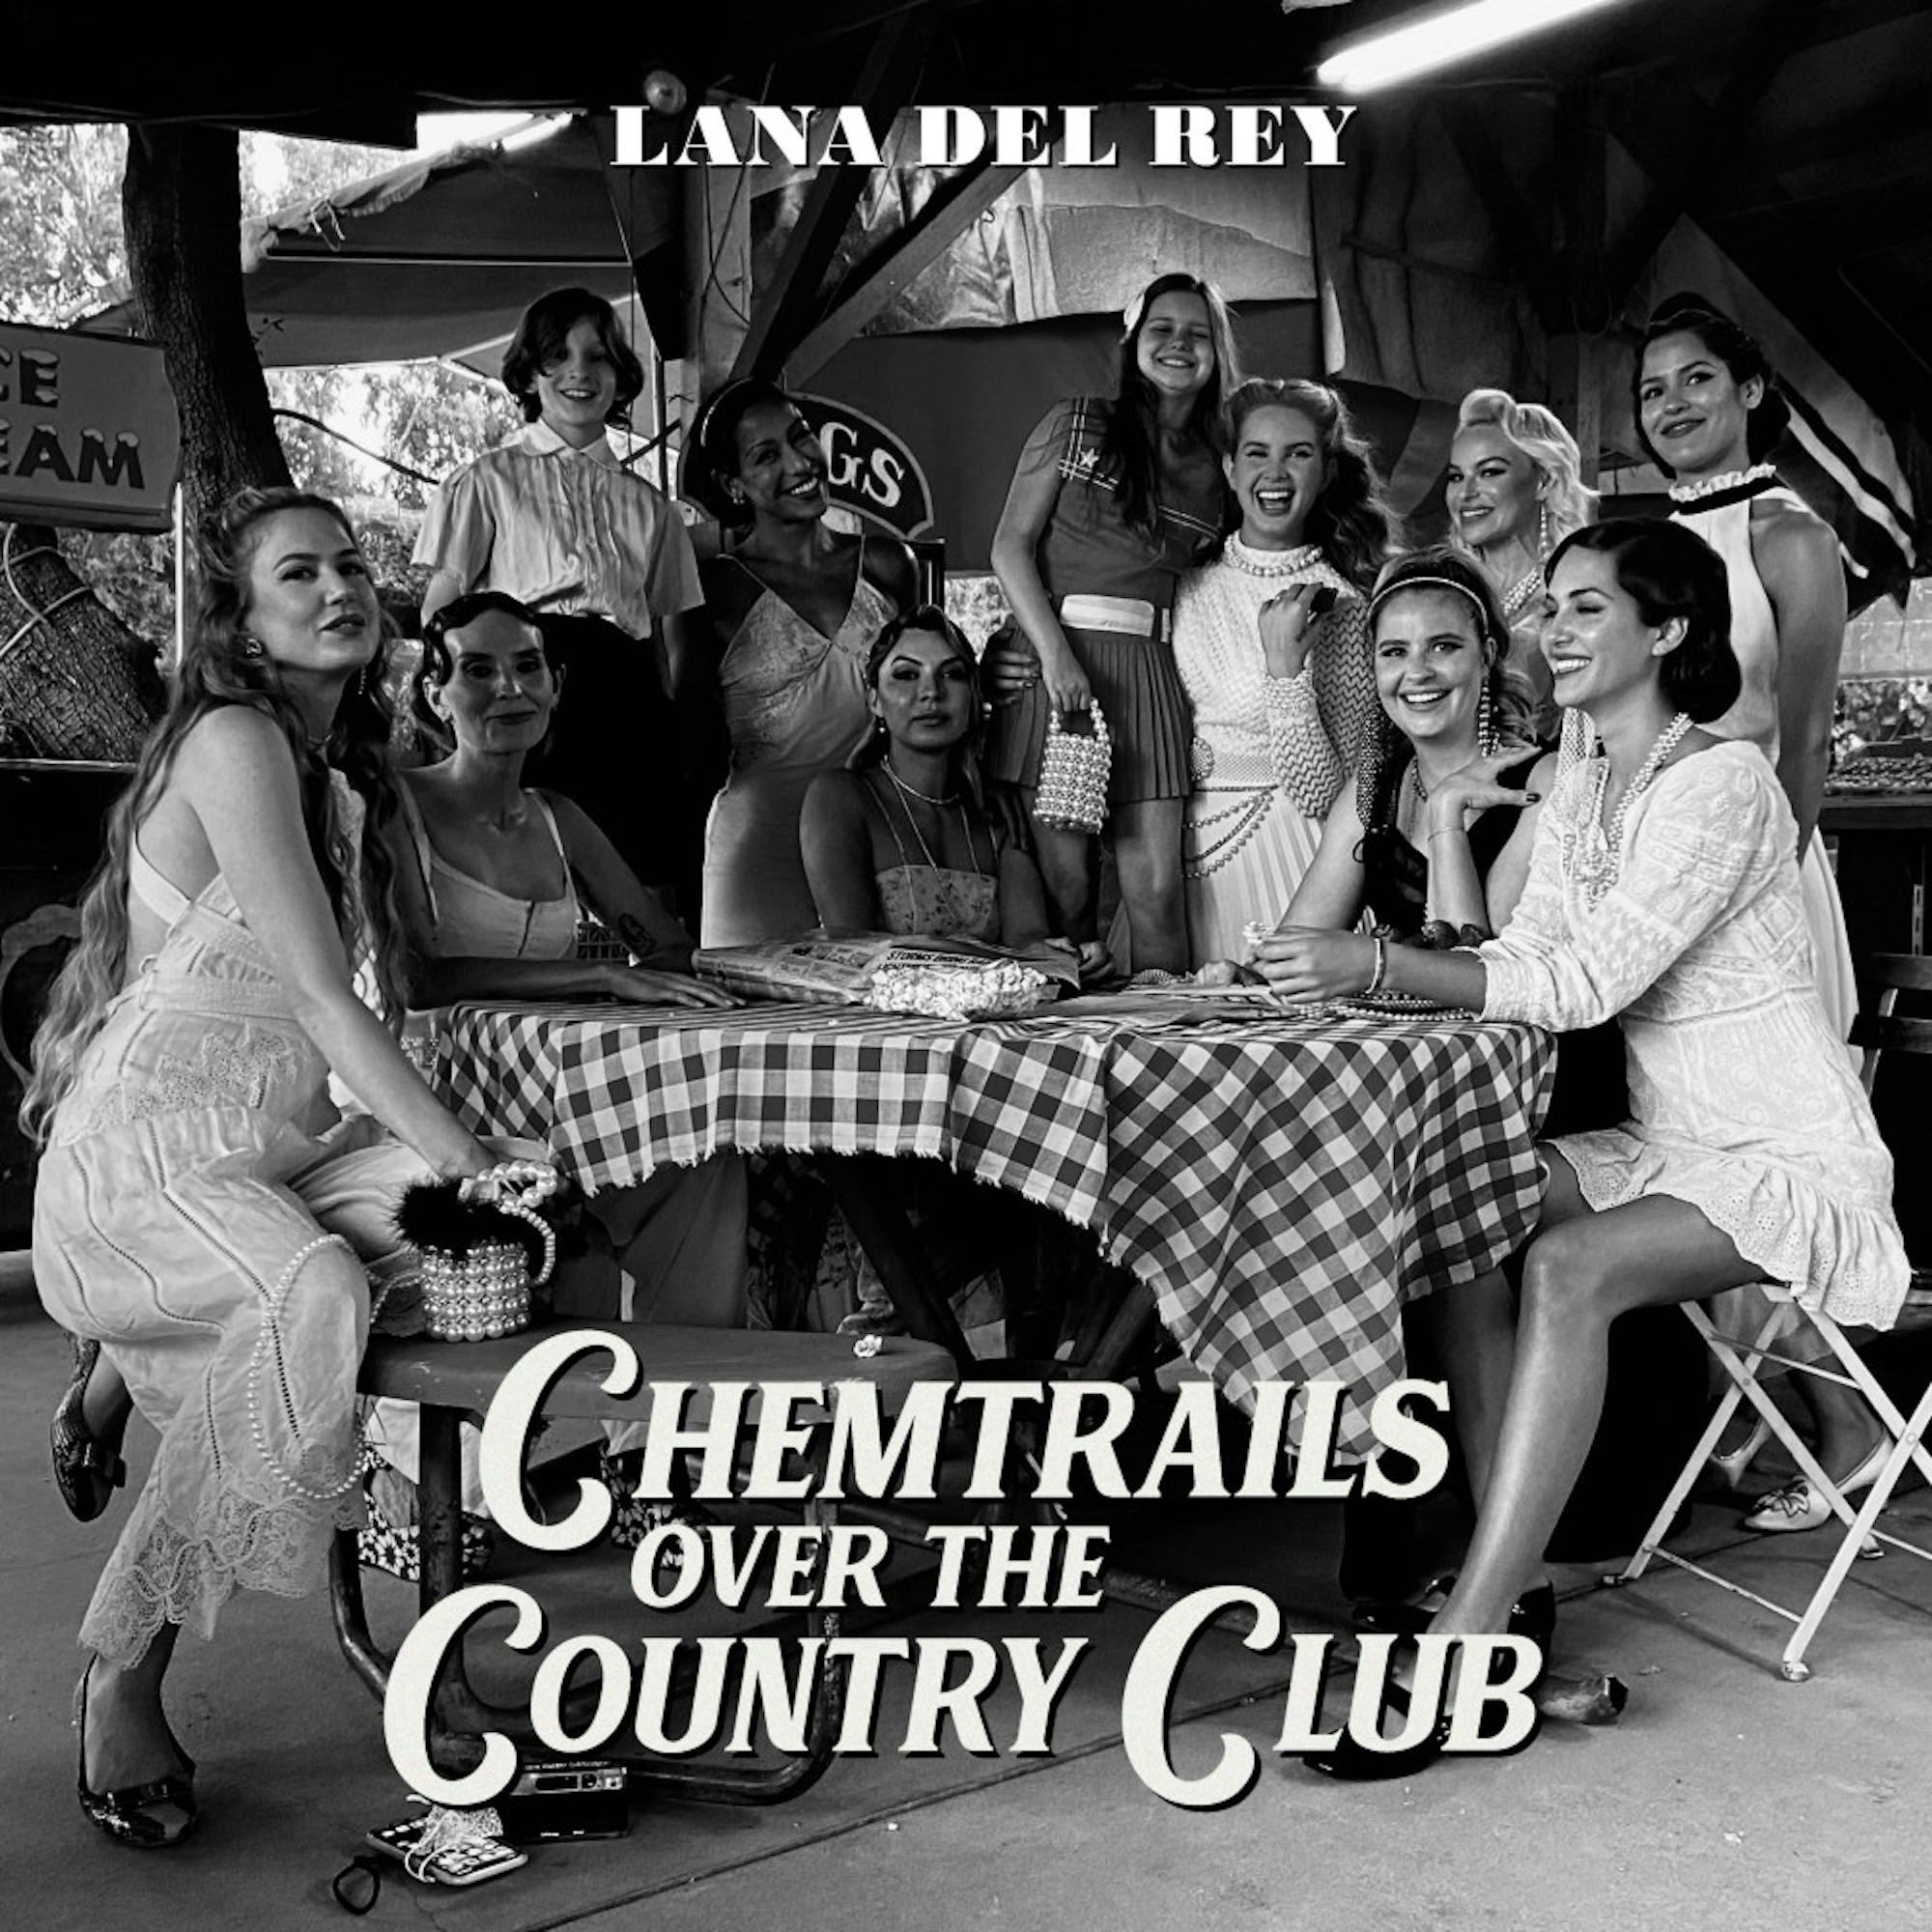 Chemtrails-Over-The-Country-Club-1616183256-scaled-1